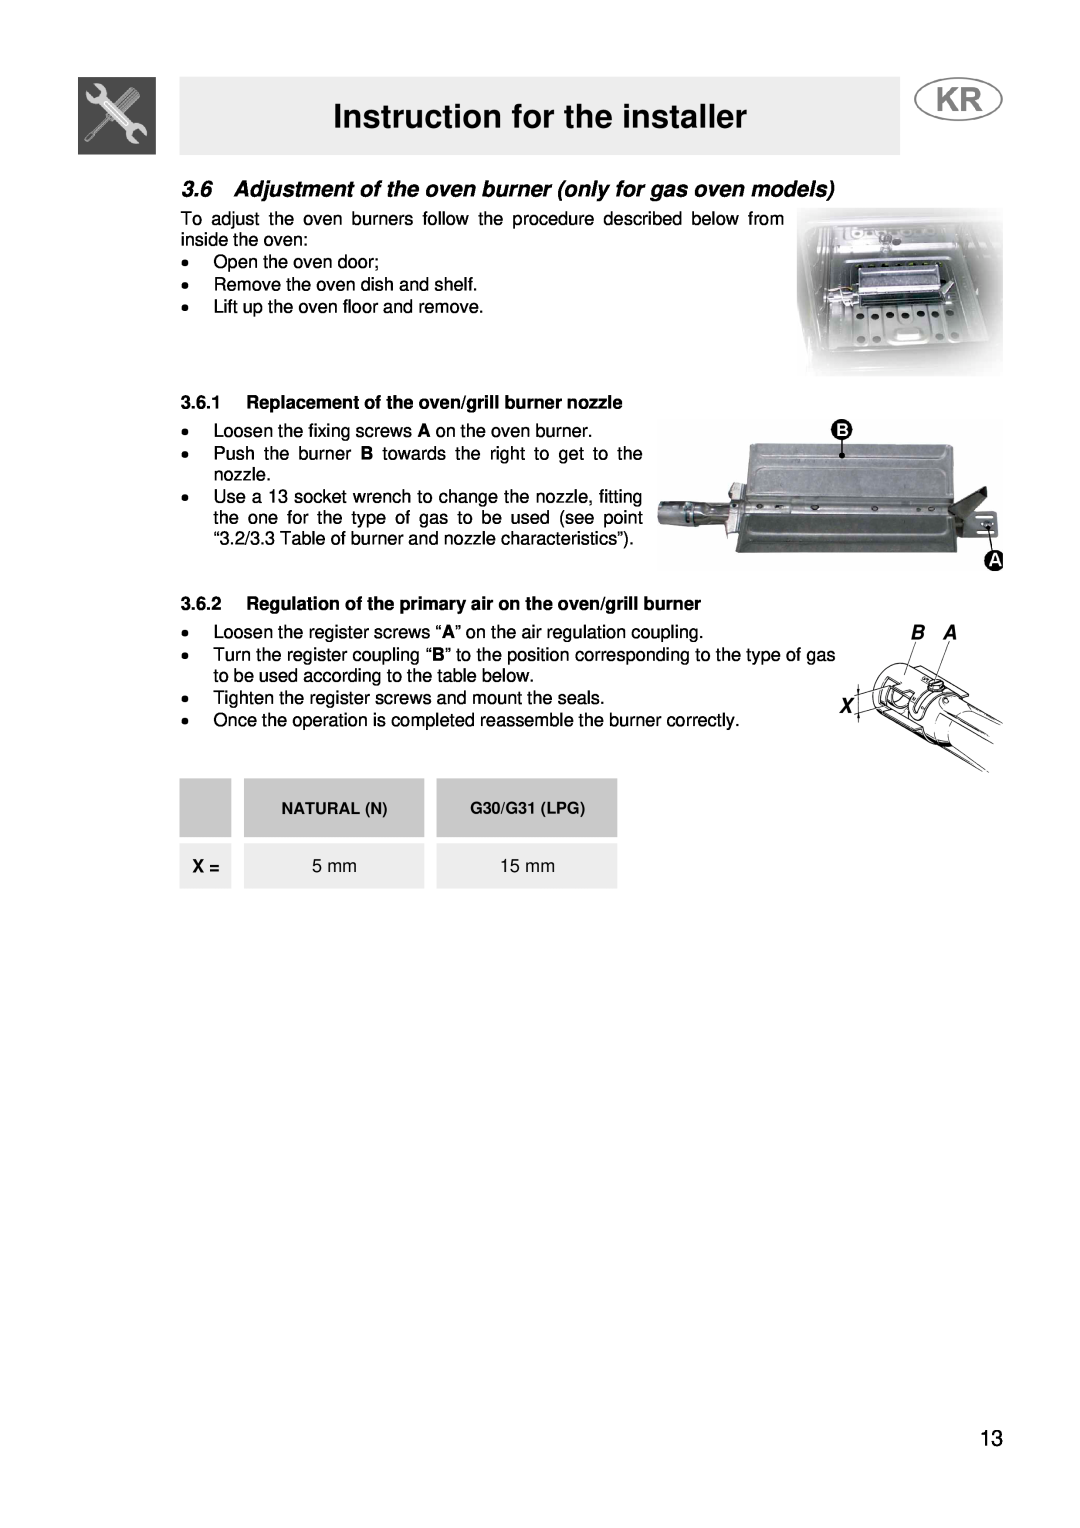 Smeg JGFC34SKB manual Instruction for the installer, 3.6.1Replacement of the oven/grill burner nozzle, 15 mm 